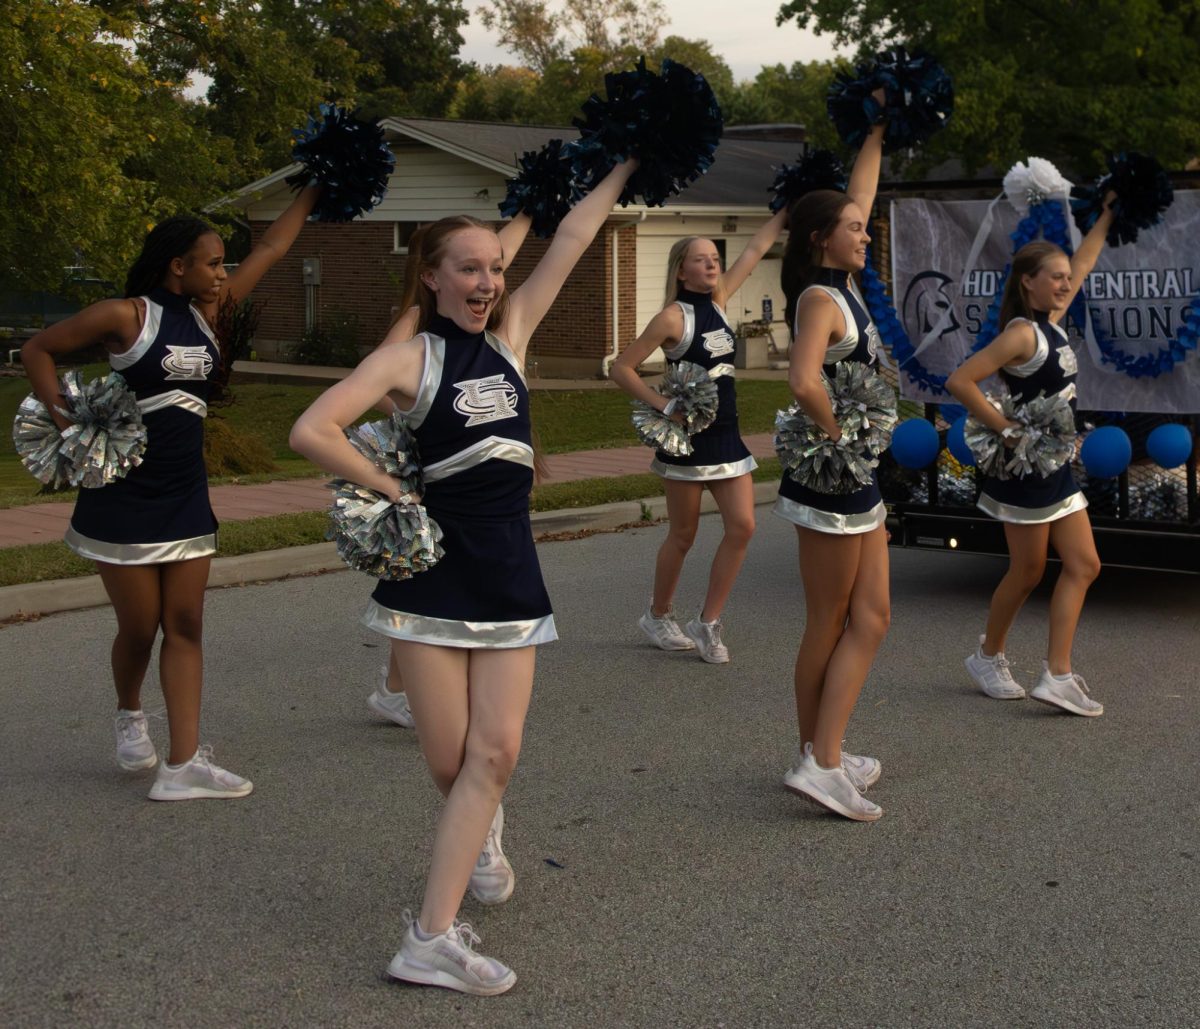 The FHC cheerleaders perform a cheer for viewers on the sidewalk.